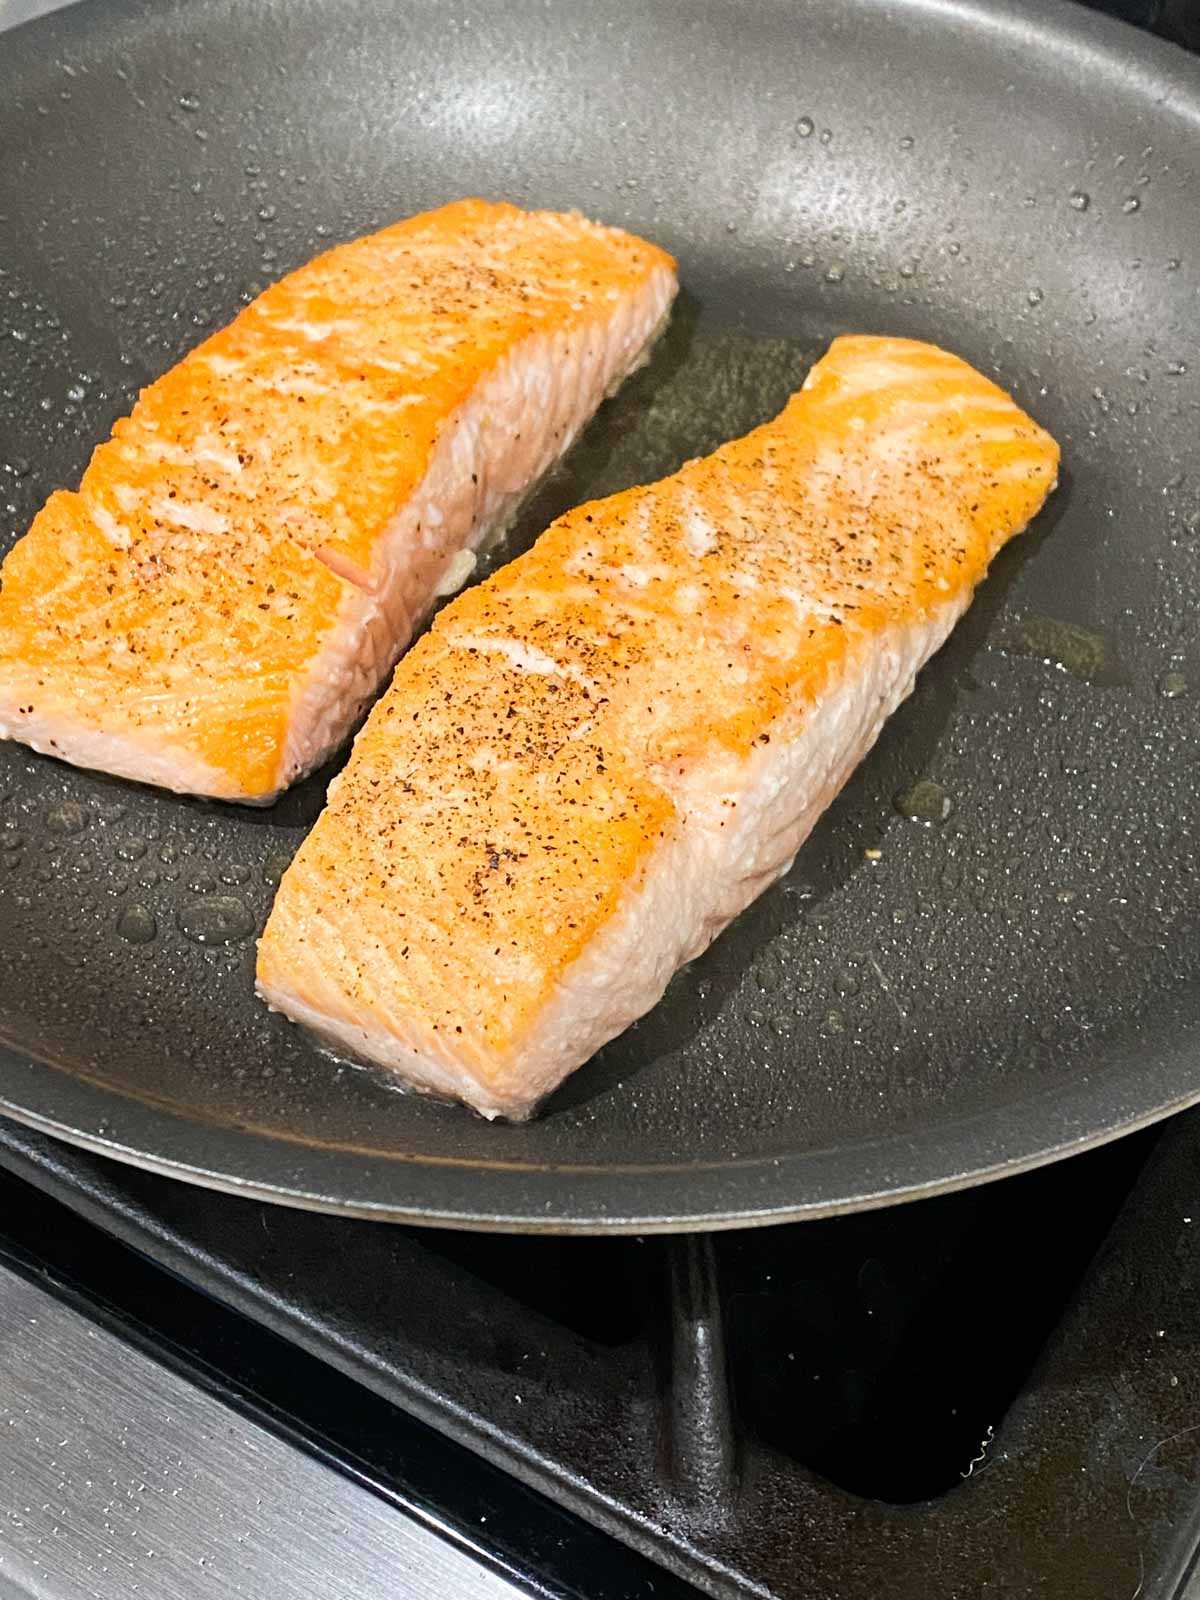 Two filets of salmon being pan seared in a nonstick pan